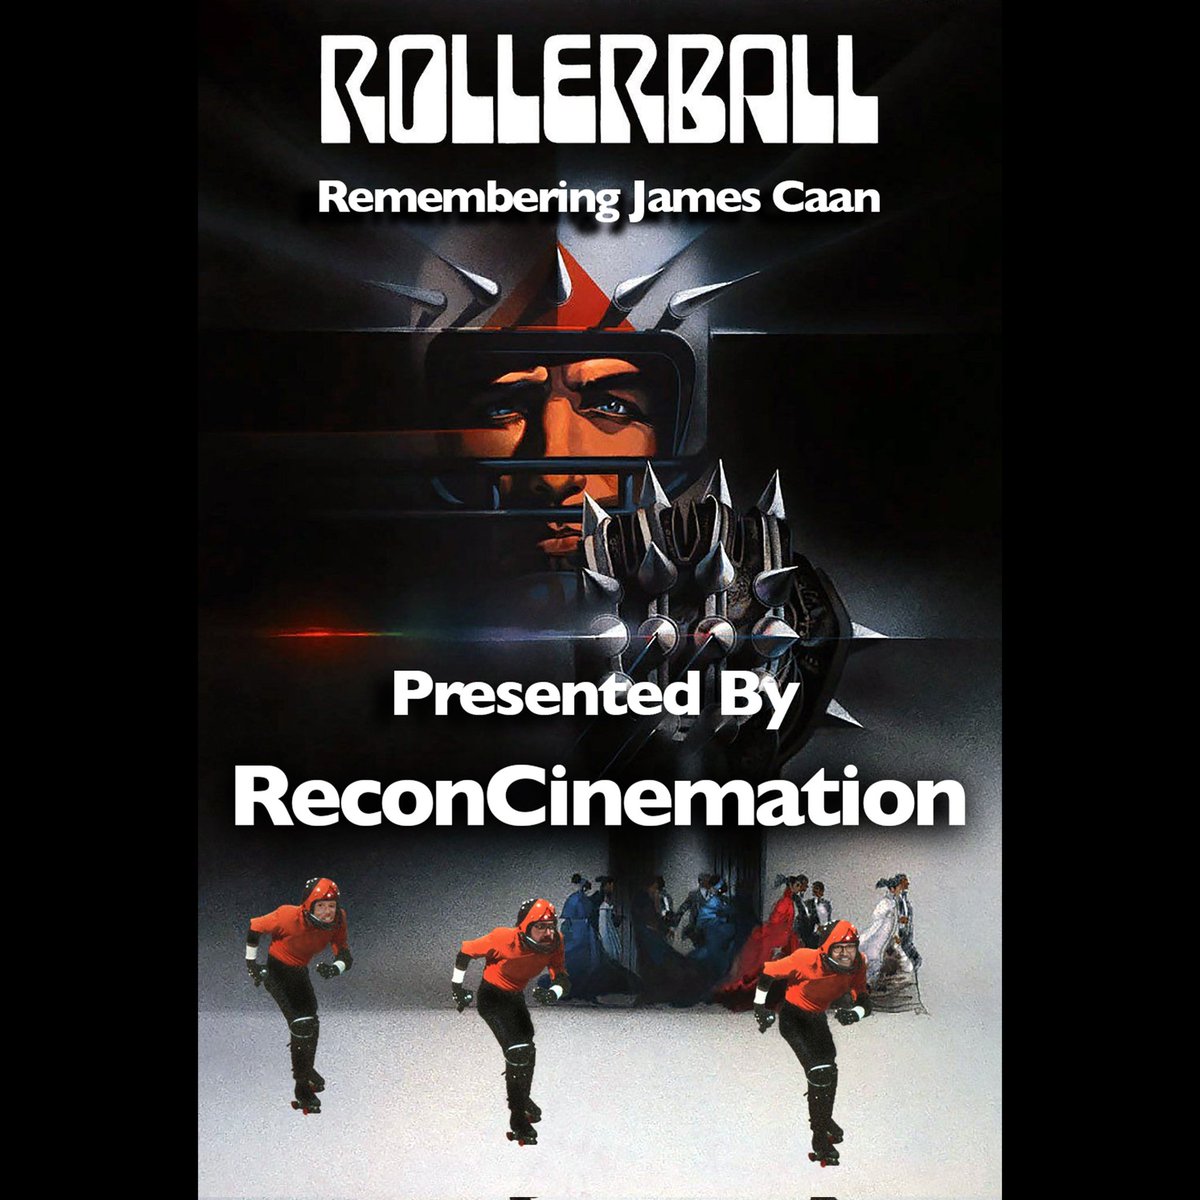 Released today in #film history! Check out our #podcast looking back at the #Rollerball:

podcasts.apple.com/us/podcast/jam…

#FilmTwitter #PodernFamily #podcasts #podcasts #podcasting #podcaster #podcastandchill #PodcastRecommendations #70s #70smovies #movies #JamesCaan #NewHollywood